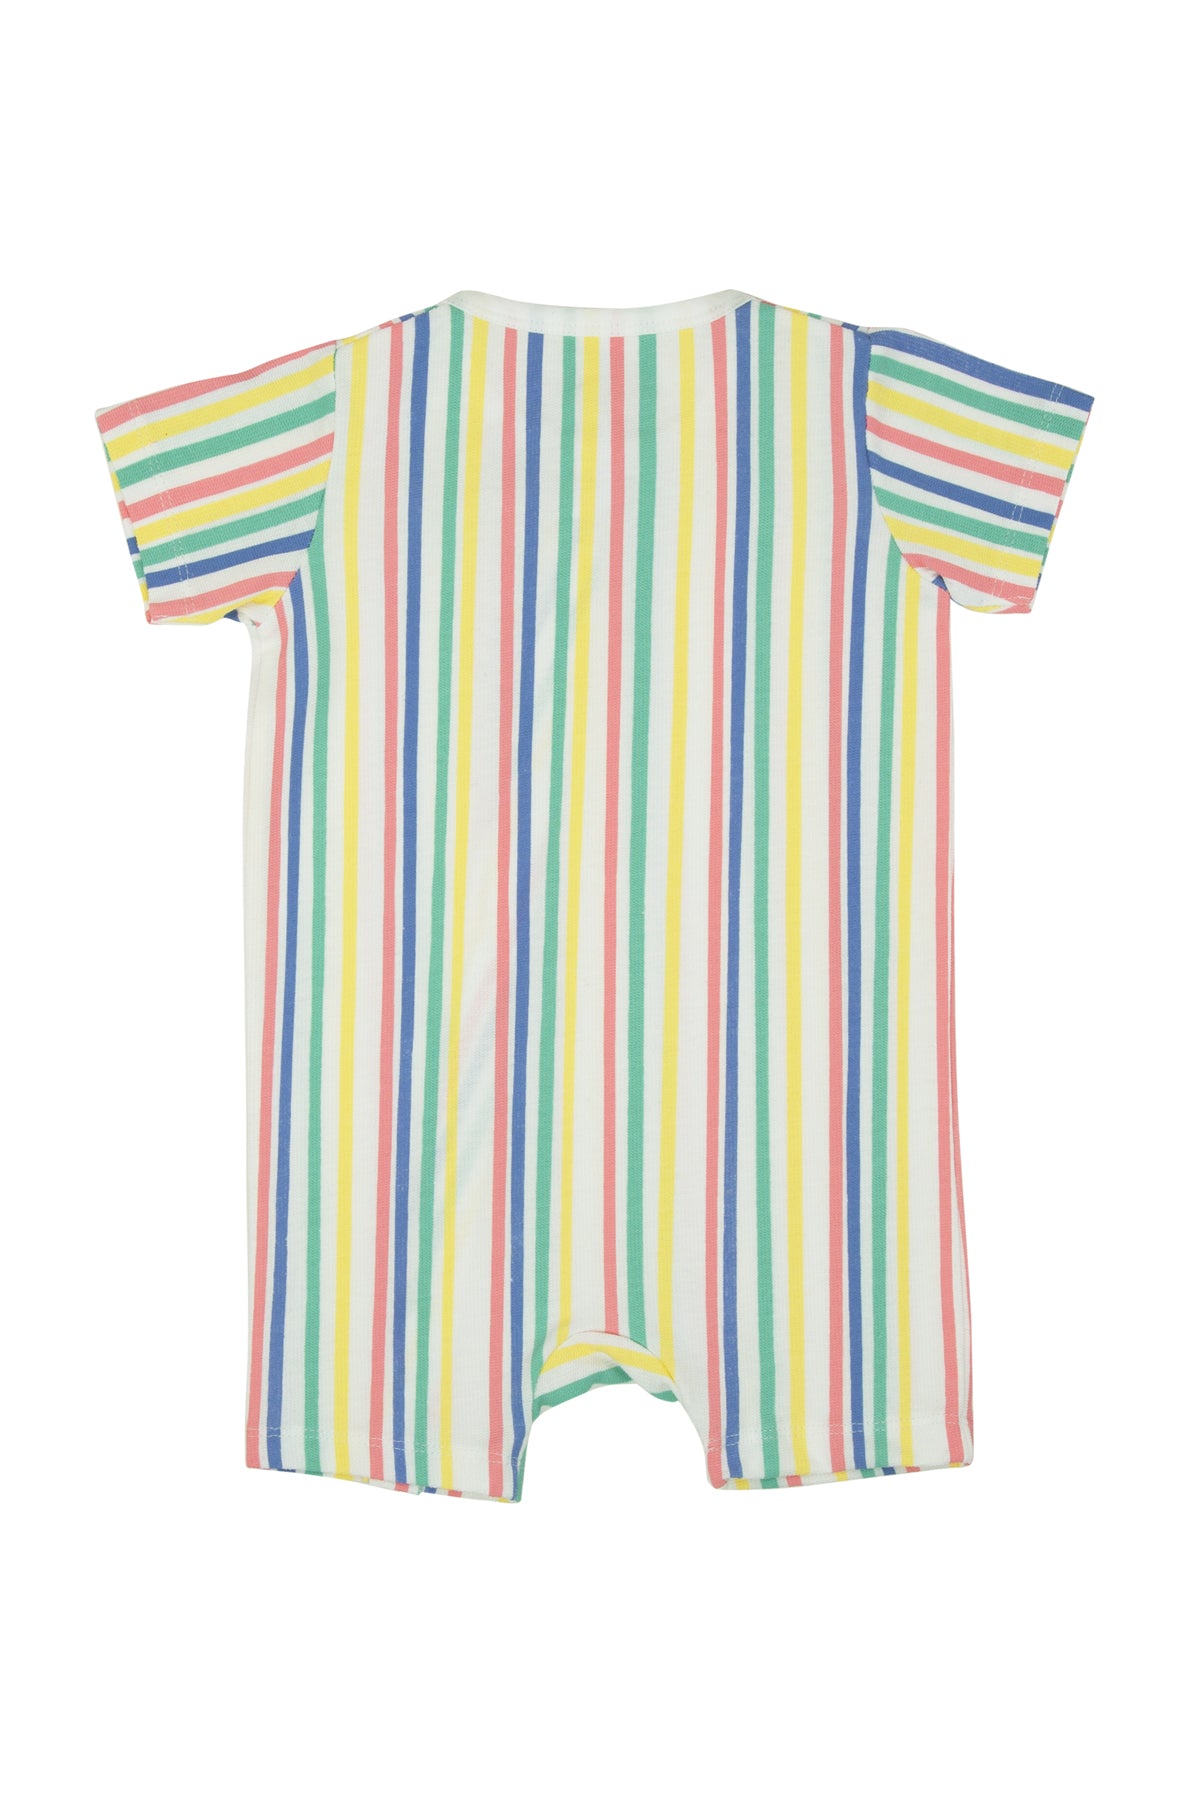 Stripes Snap Up Short One-Piece